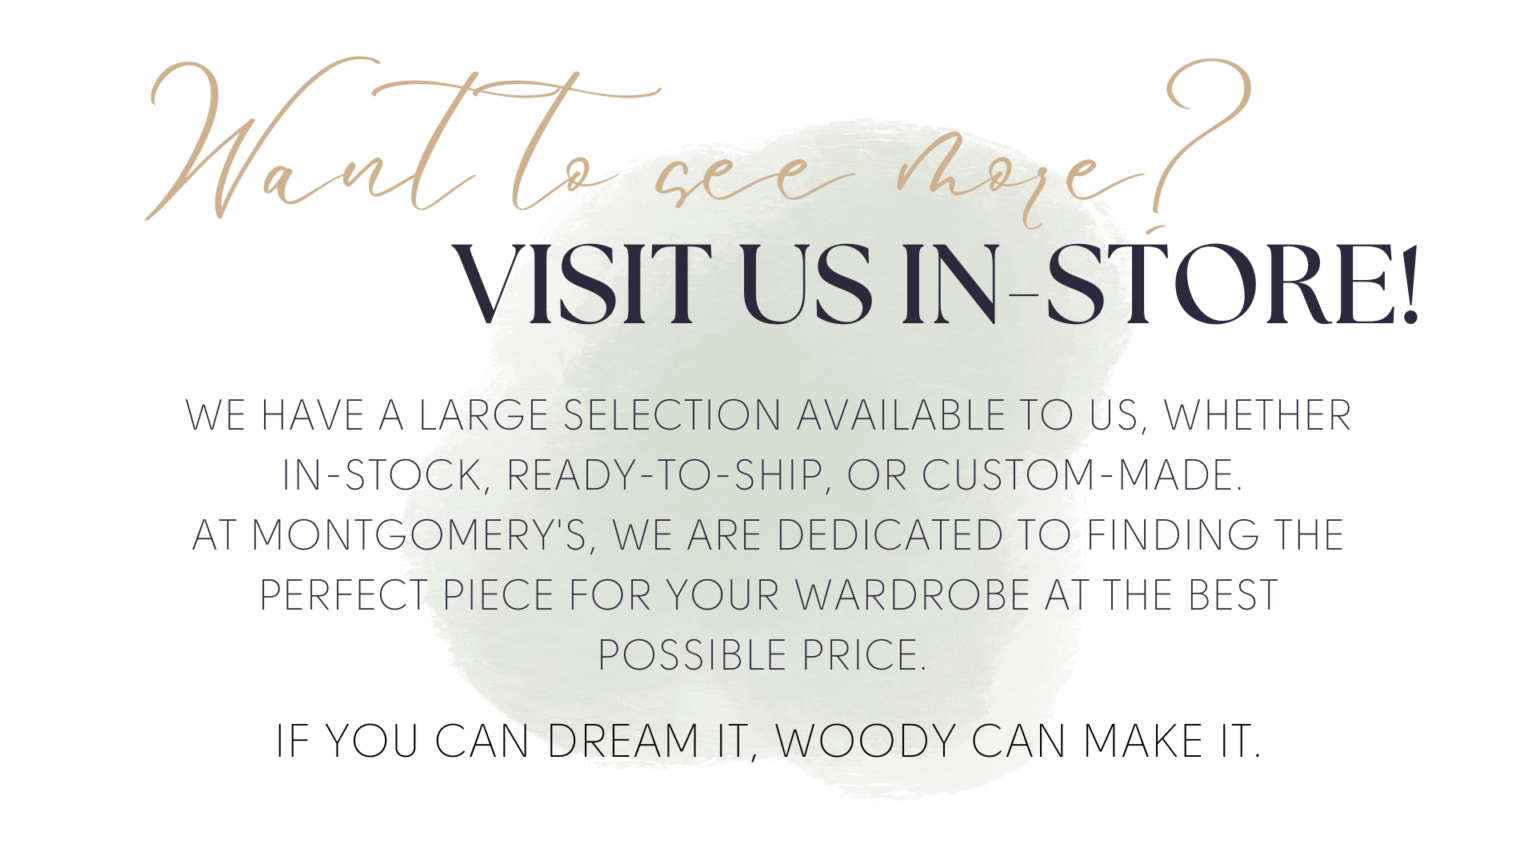 Want to see more? Visit us in store! We have a large selection Available to us, whether in-stock, ready-to-ship, or Custom-made. At Montgomery's, we are dedicated to finding the perfect piece for your wardrobe at the best Possible price. If you can dream it, Woody can make it.